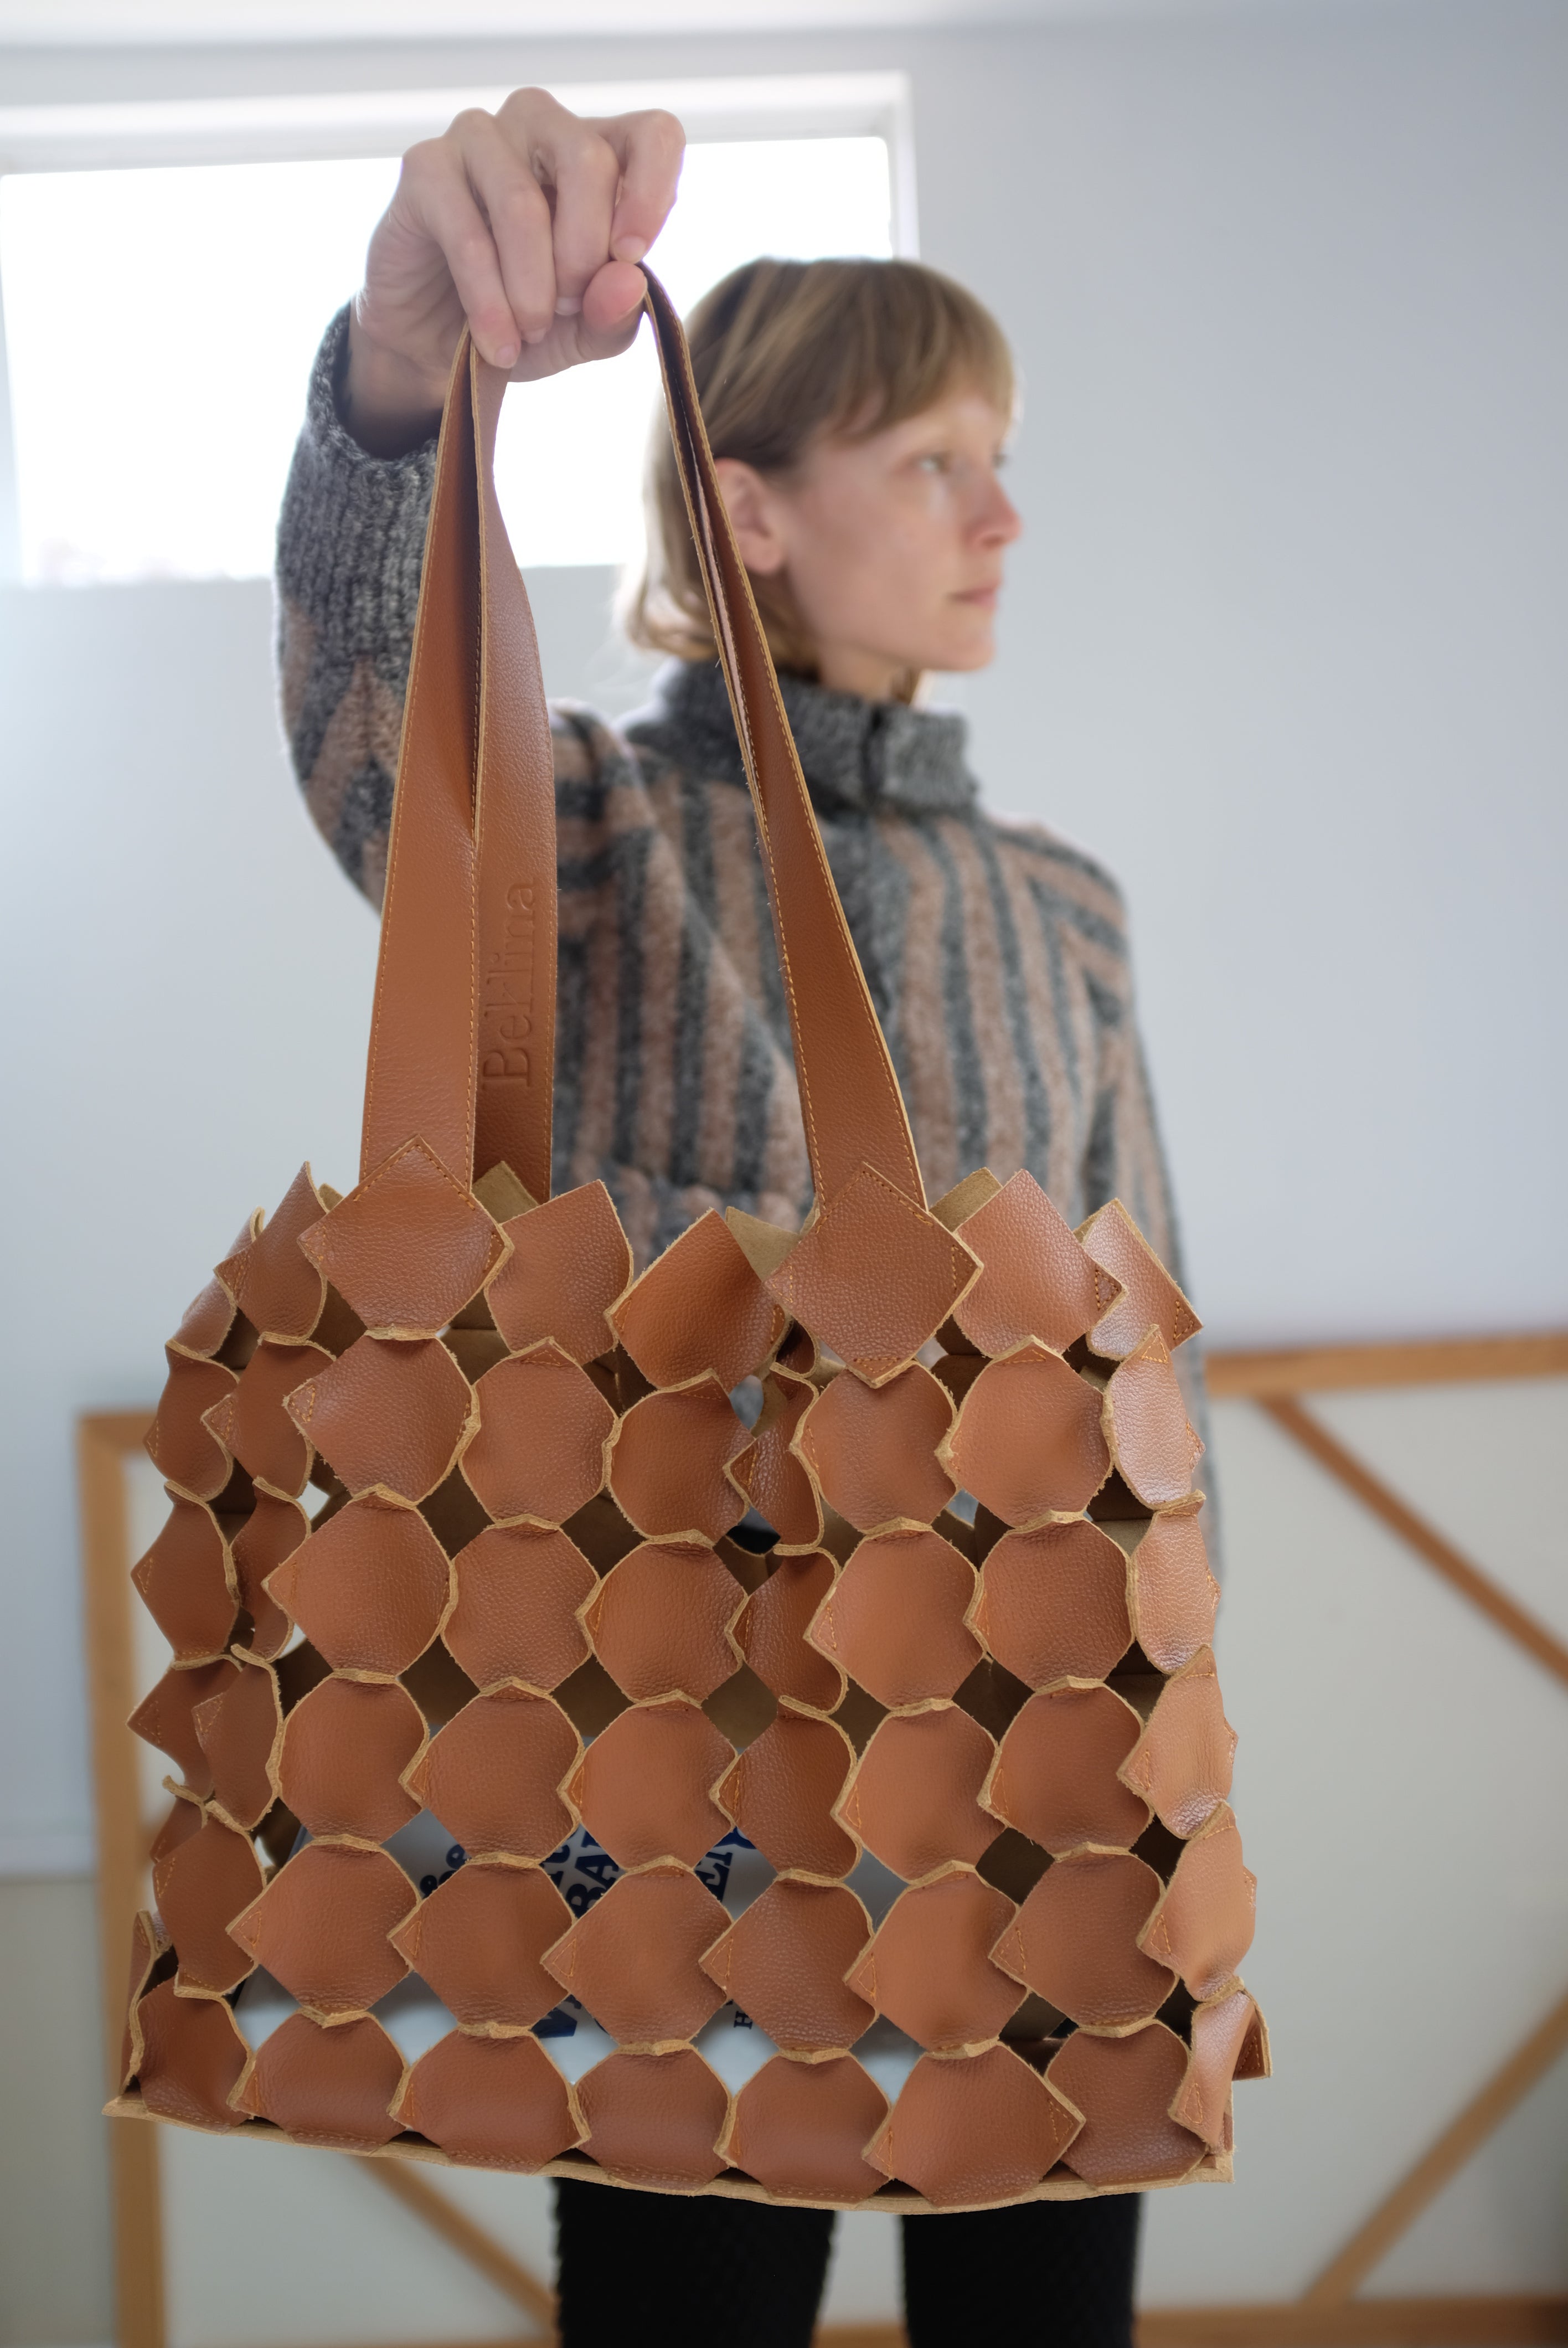 Woven Leather Bag Leather Tote Soft Bag